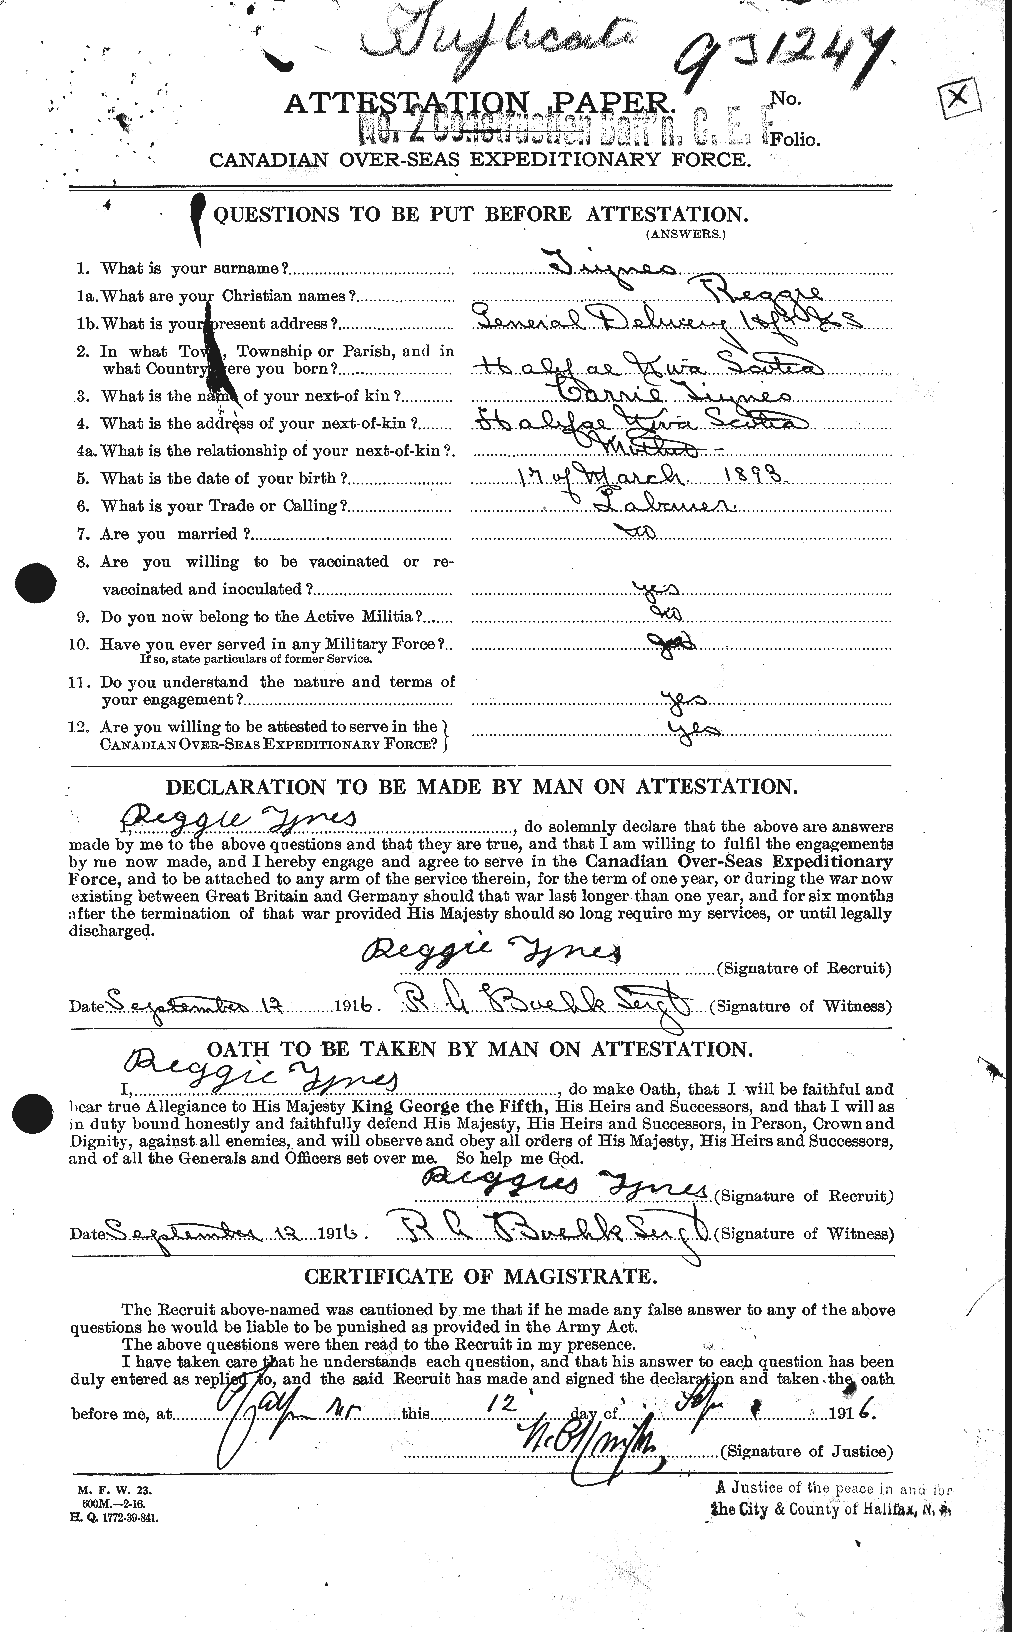 Personnel Records of the First World War - CEF 644540a